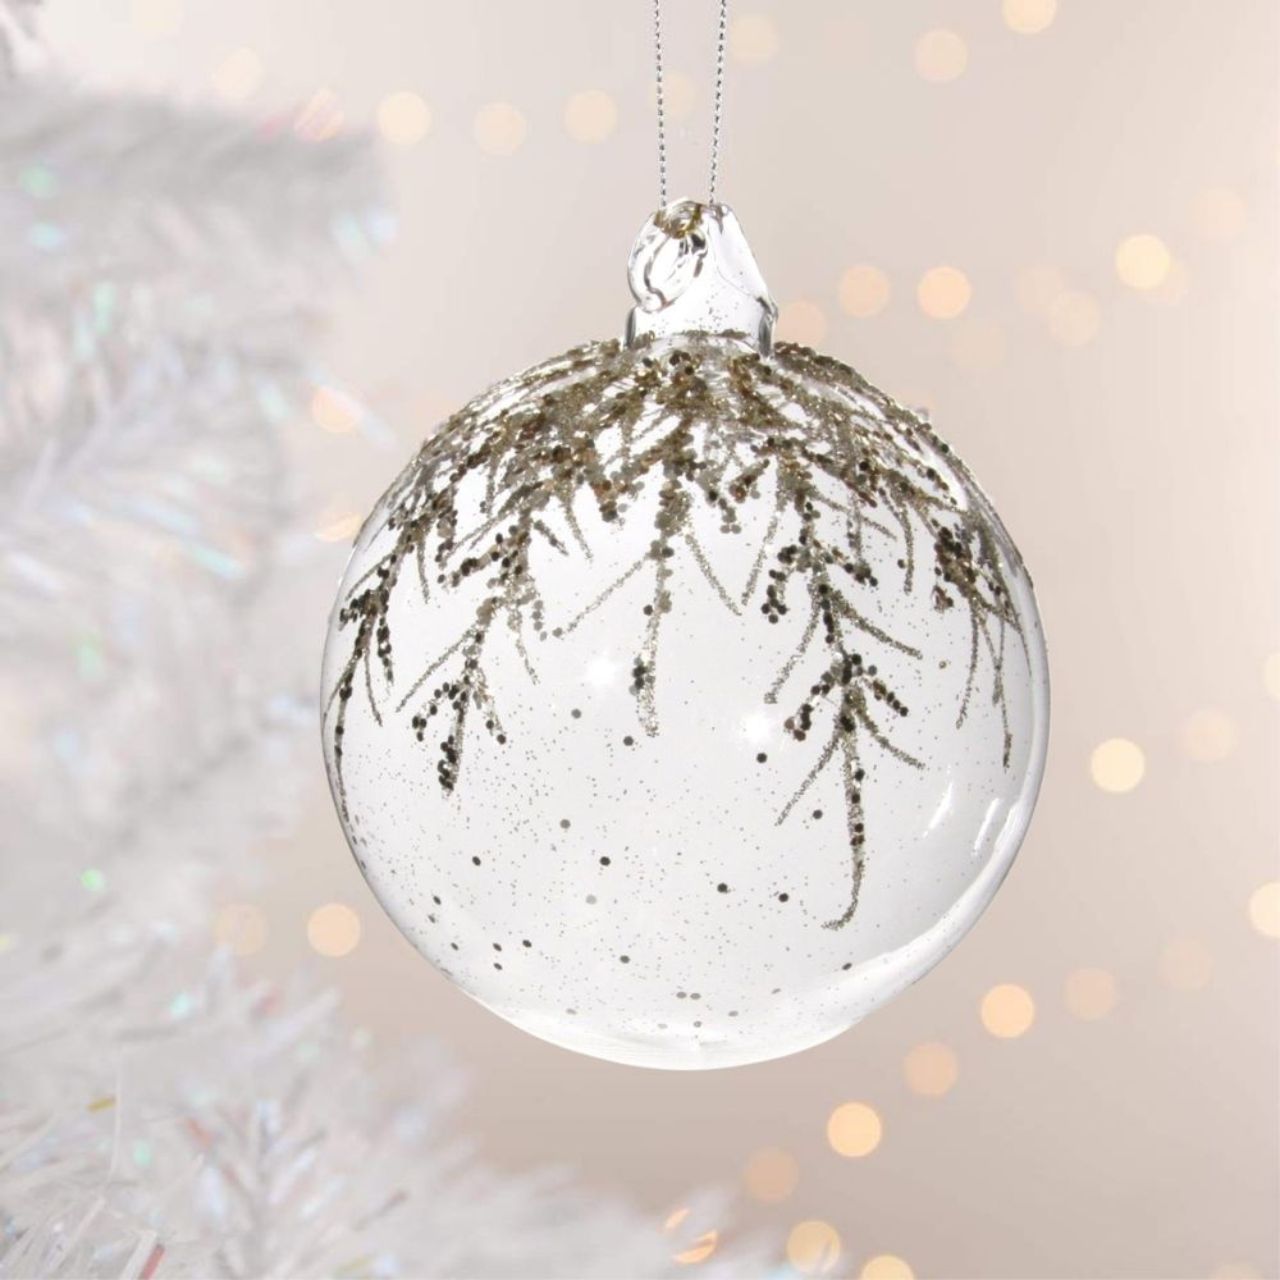 Shishi Clear Glass Ball with Glitter Fern Christmas Hanging Ornament  Browse our beautiful range of luxury festive Christmas tree decorations, baubles & ornaments for your tree this Christmas.